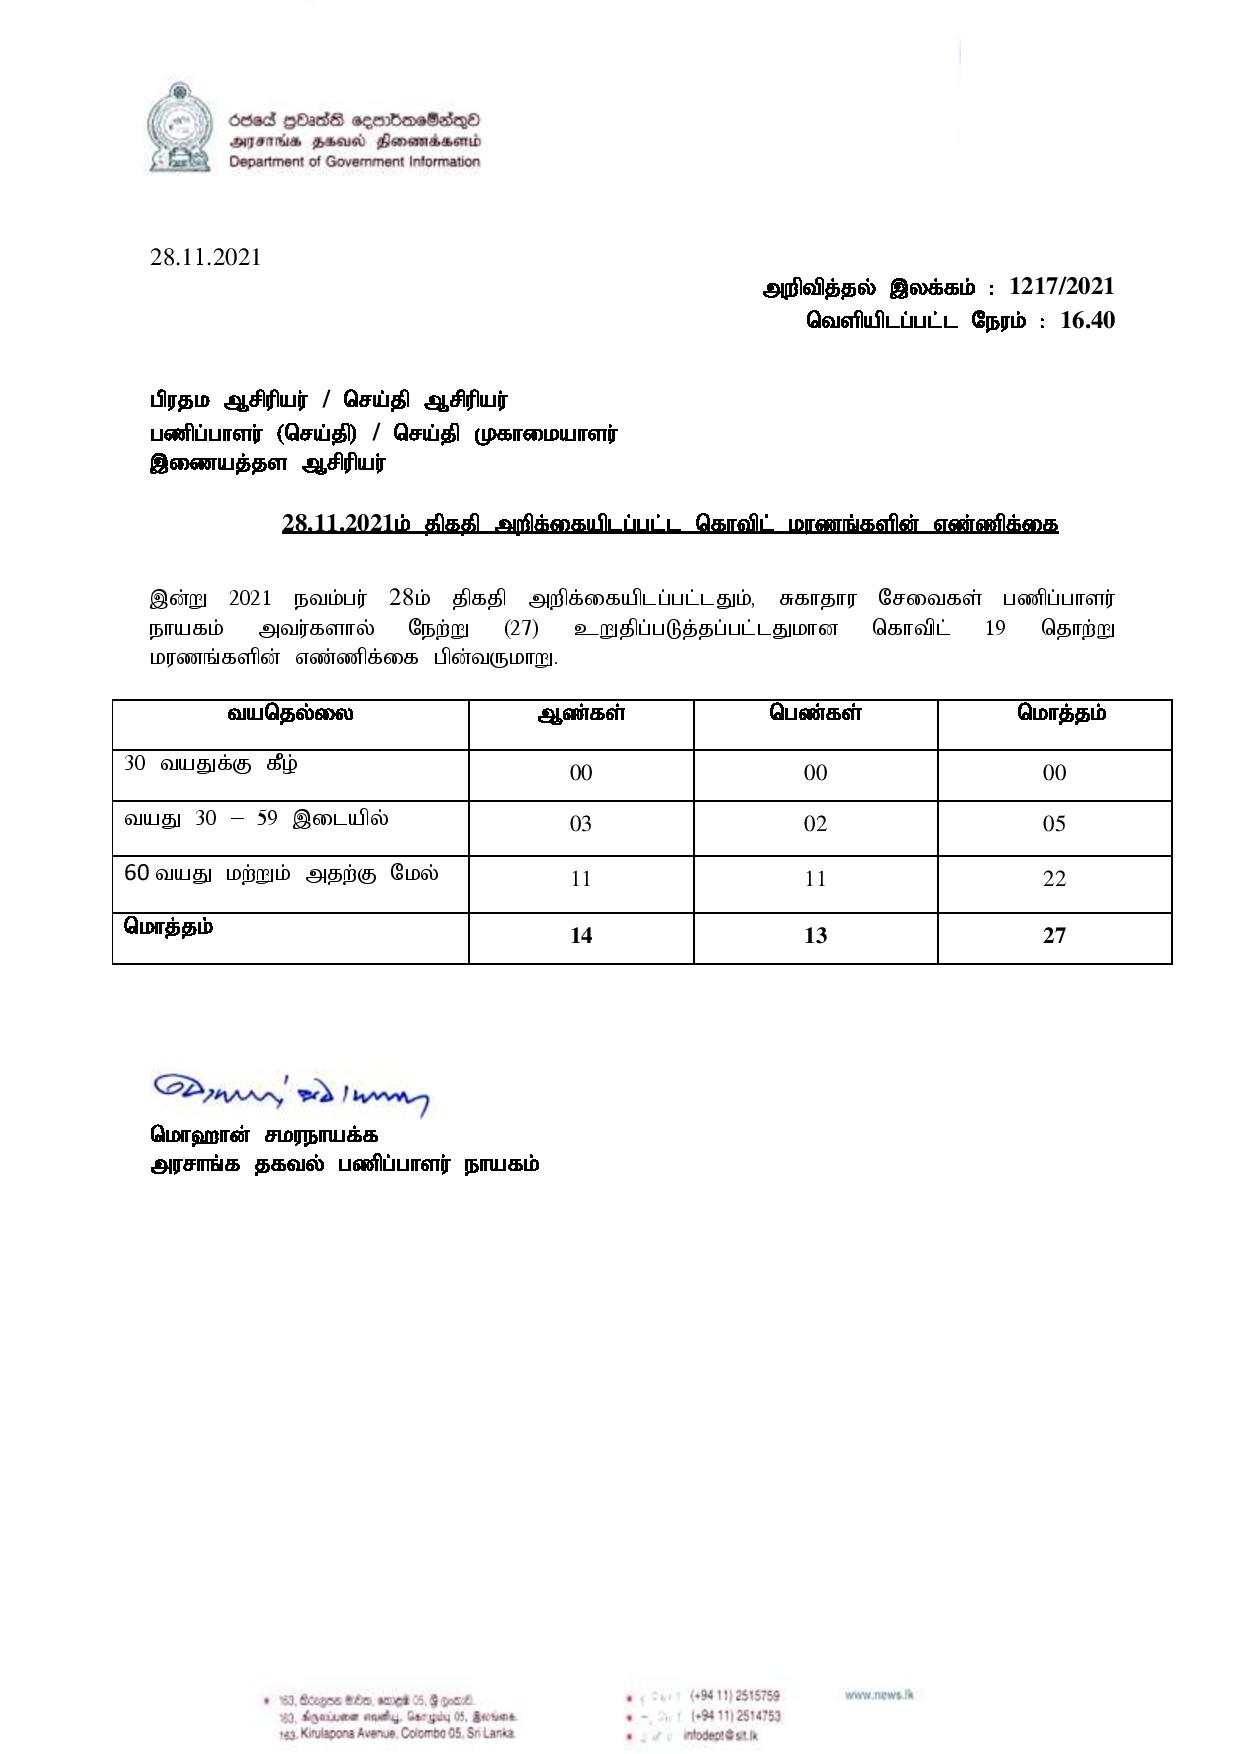 Release No 1217 Tamil page 001